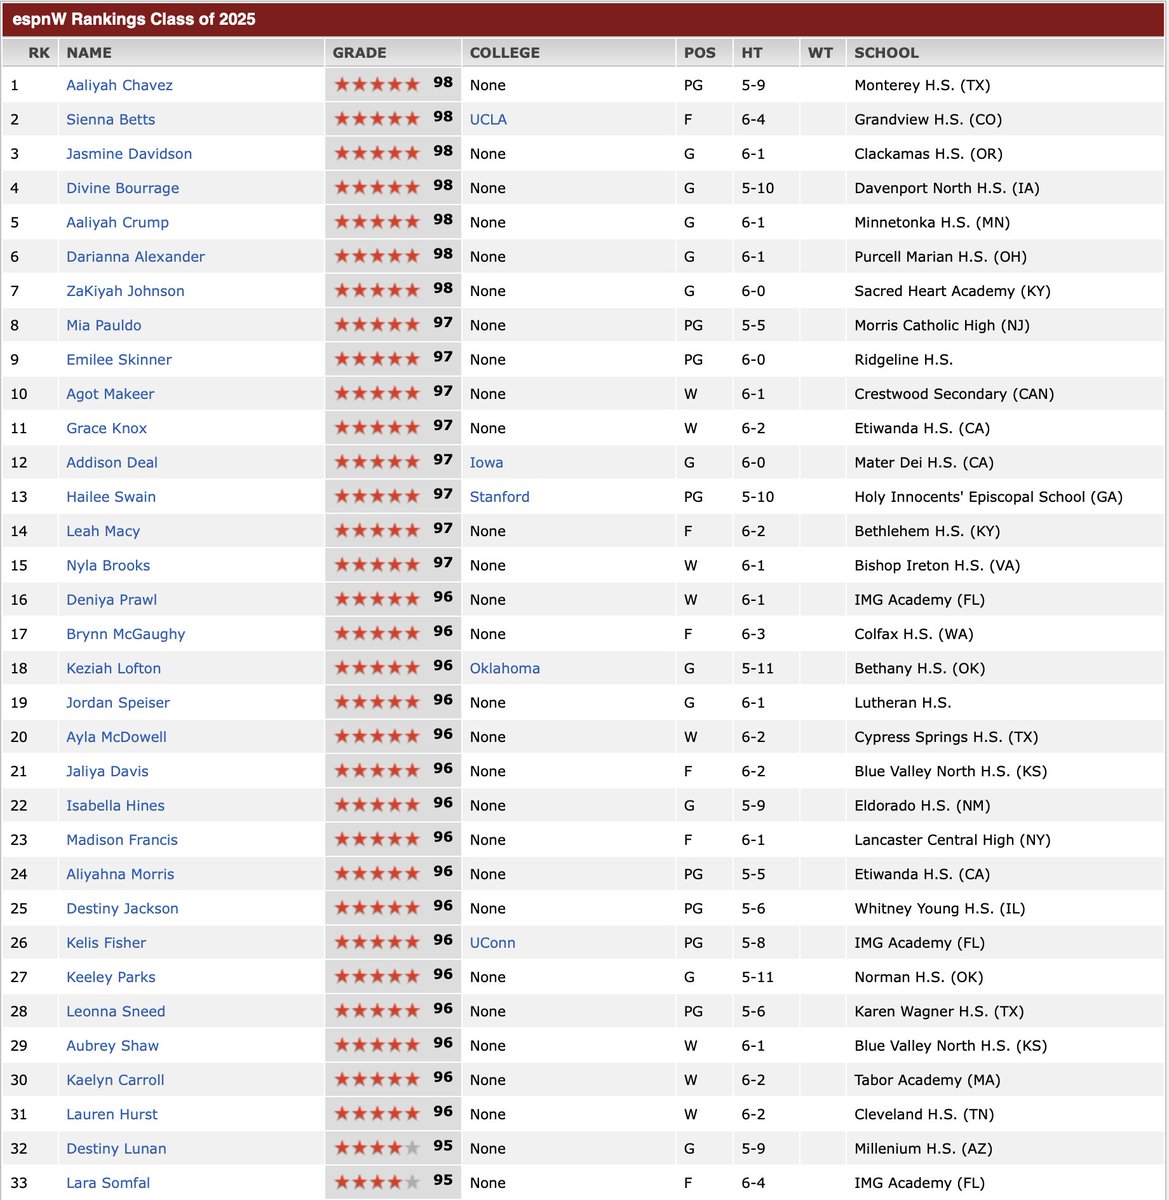 🗣️📢 NEW @espnw HS c/o '25 RANKINGS 🫖 @UCLAWBB commit @SiennaBetts now #2 overall & clear-cut #1 post 🧸 @BourrageDivine of Iowa up to #4—same as @CaitlinClark22 was 🤯🇨🇦 @makeer_agot = biggest stock📈riser cracking top 10?! @g_mmoney2 up to #11 🐨 @lara_somfai debuts @ #33 🇦🇺